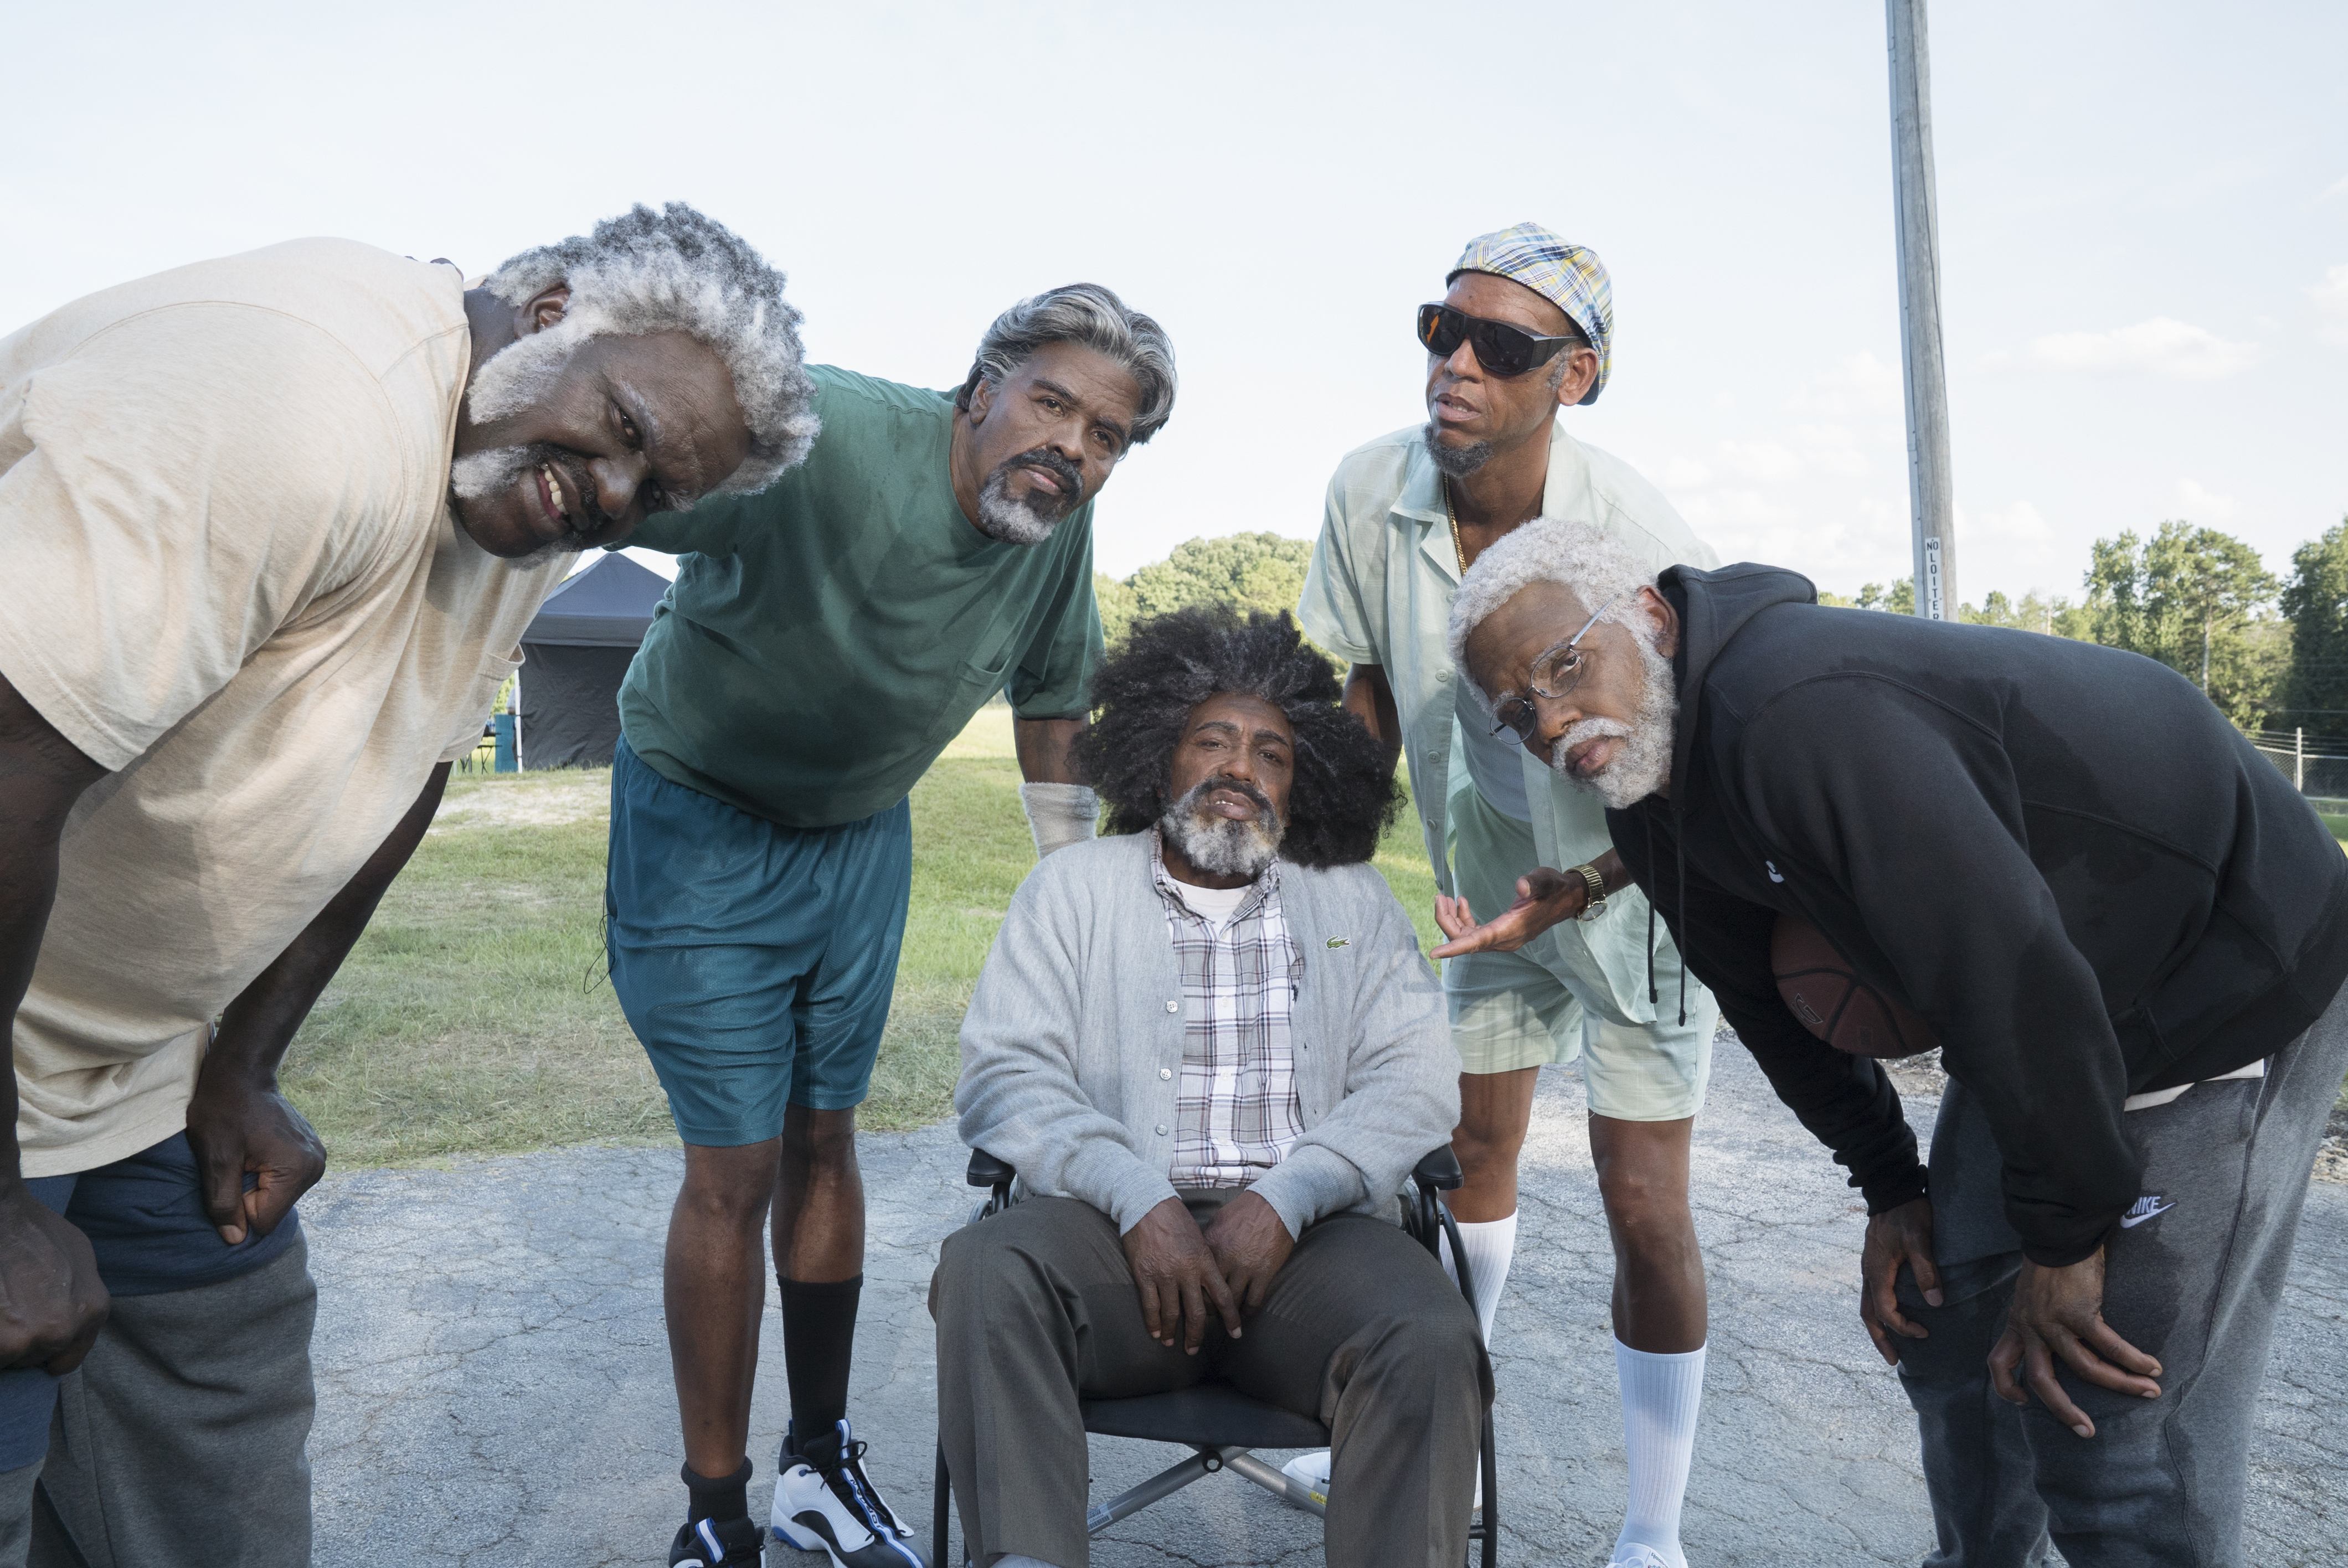  From L to R: Shaquille O'Neal, Chris Webber, Nate Robinson, Reggie Miller and Kyrie Irving on the set of UNCLE DREW. Photo Credit: Quantrell Colbert 